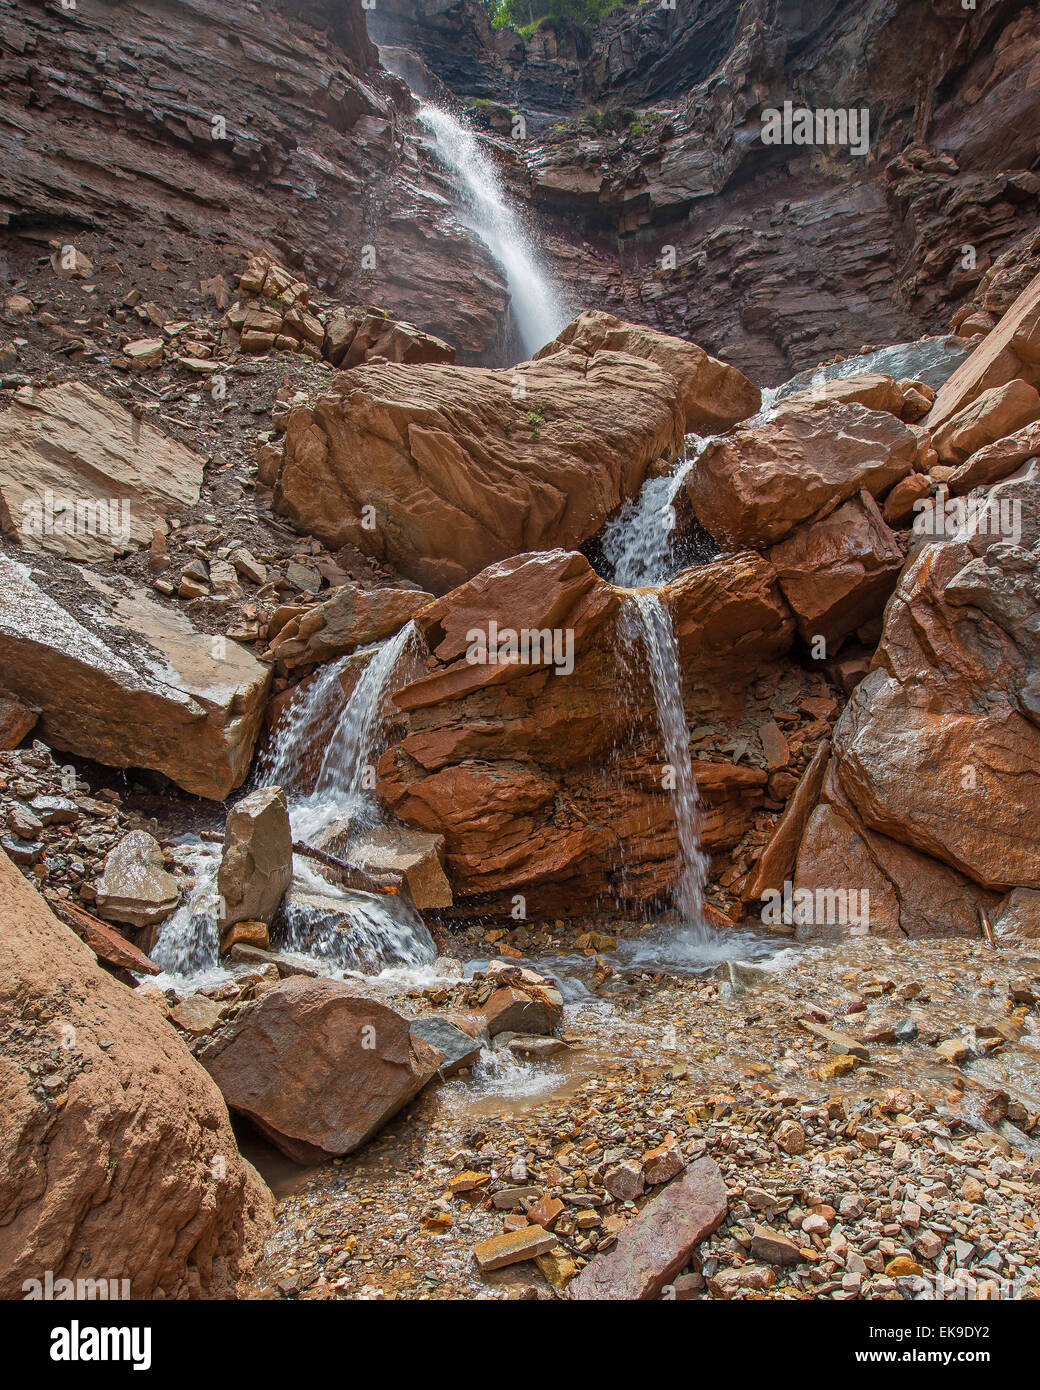 The Bletterbach geoparc. Canyon with waterfall and porphyry rocks. Italy. Europe. Stock Photo